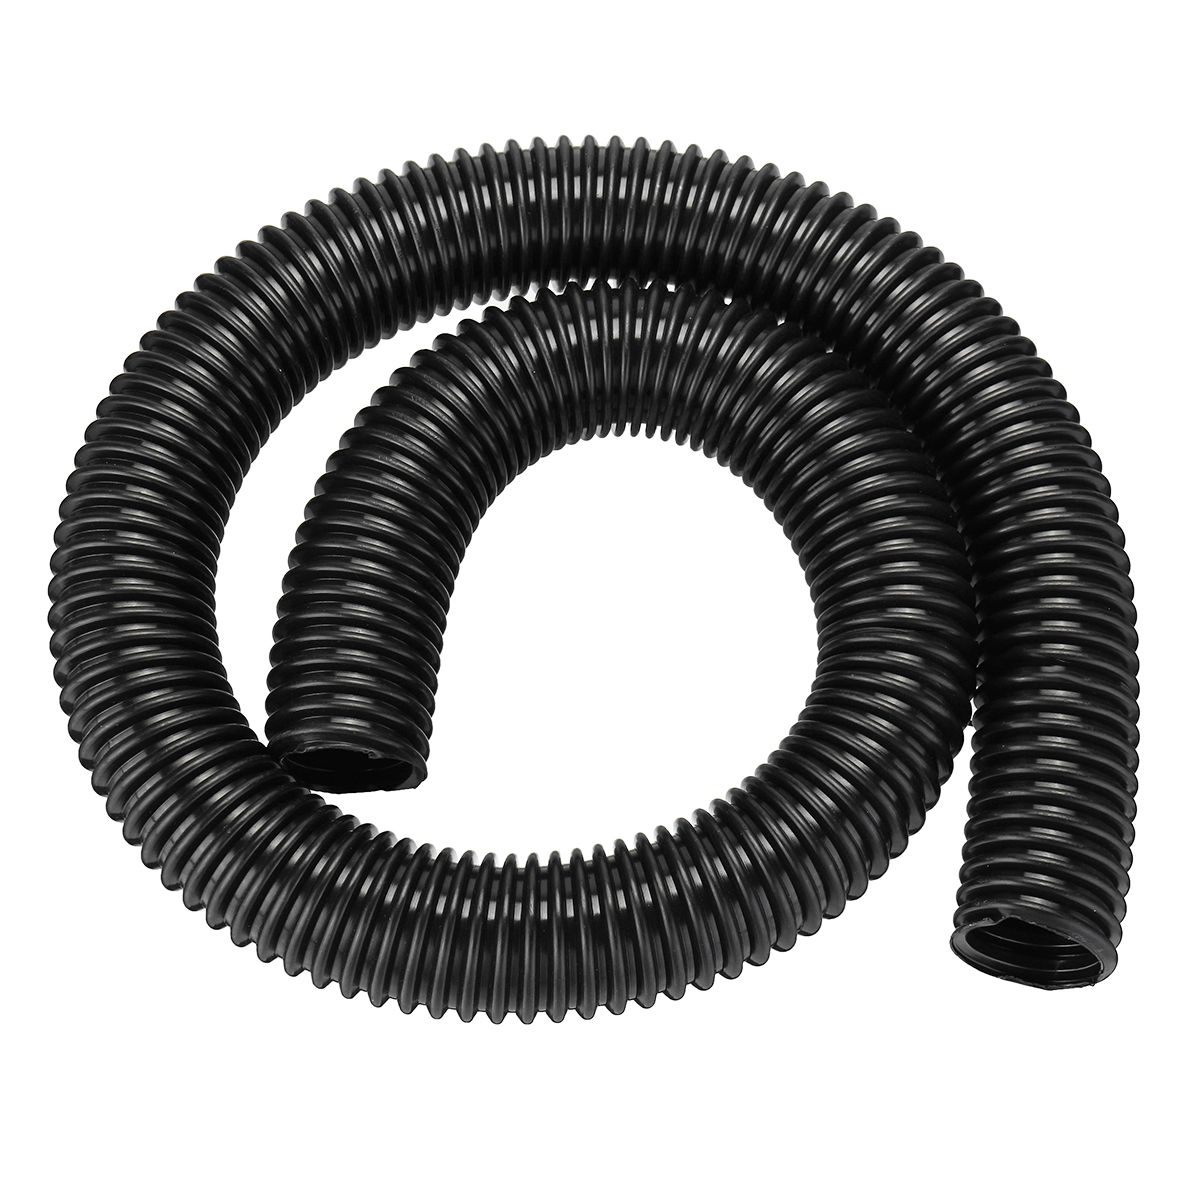 32mm-EVA-Flexible-Suction-Corrugated-Hose-Tube-Pipe-Vacuum-Cleaner-Accessory-Tool-Household-1382435